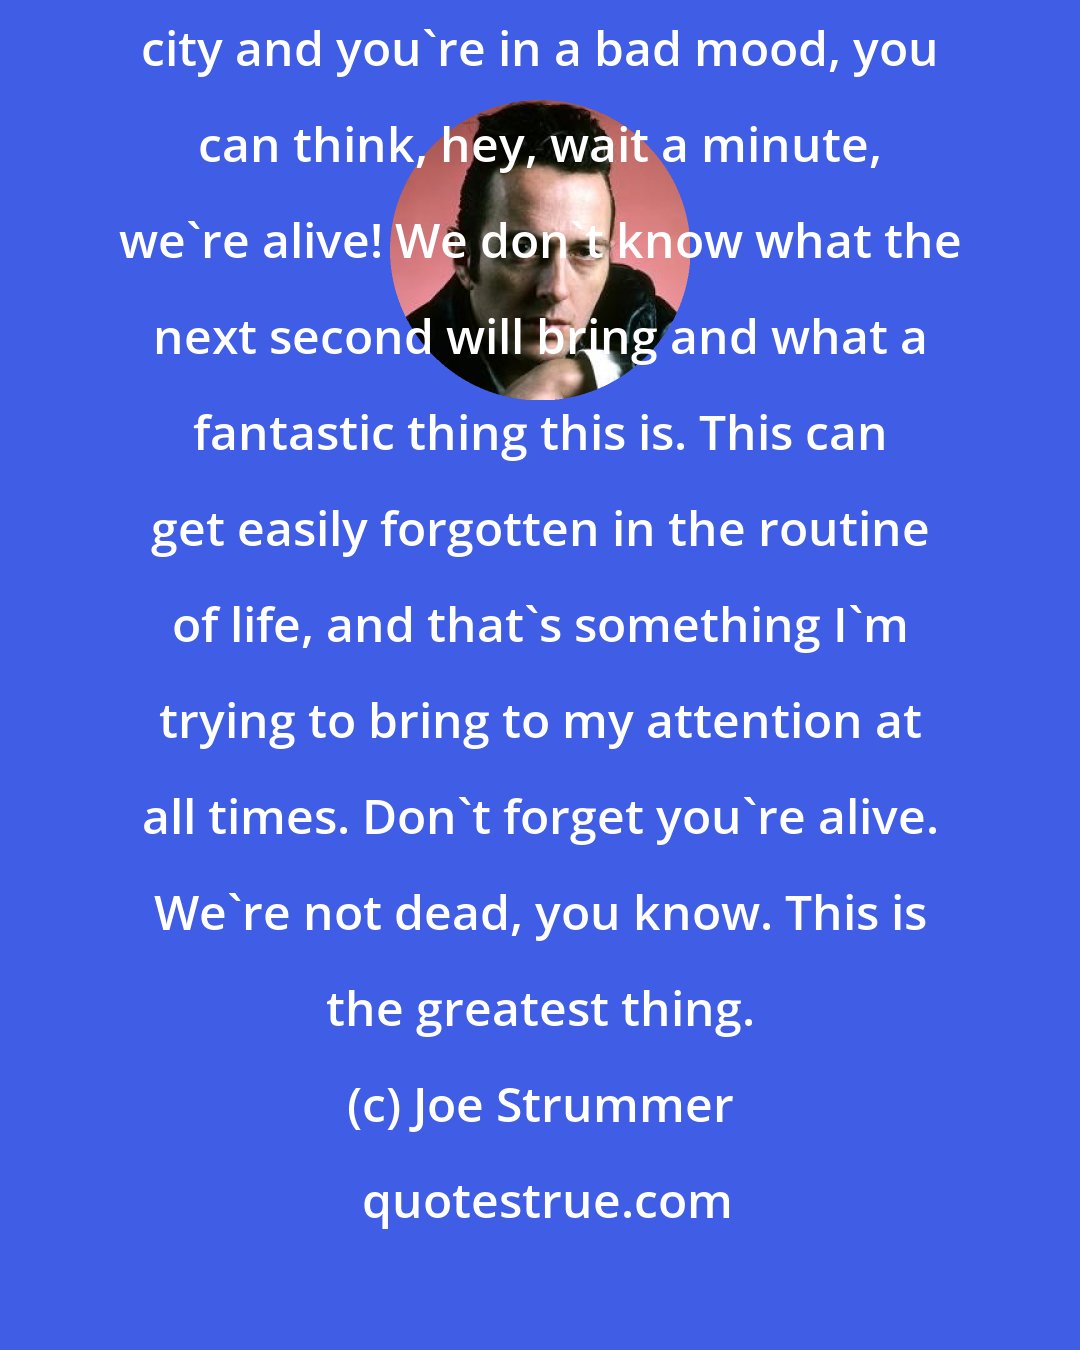 Joe Strummer: Don't forget you're alive. 'Cause sometimes when you walk around the city and you're in a bad mood, you can think, hey, wait a minute, we're alive! We don't know what the next second will bring and what a fantastic thing this is. This can get easily forgotten in the routine of life, and that's something I'm trying to bring to my attention at all times. Don't forget you're alive. We're not dead, you know. This is the greatest thing.